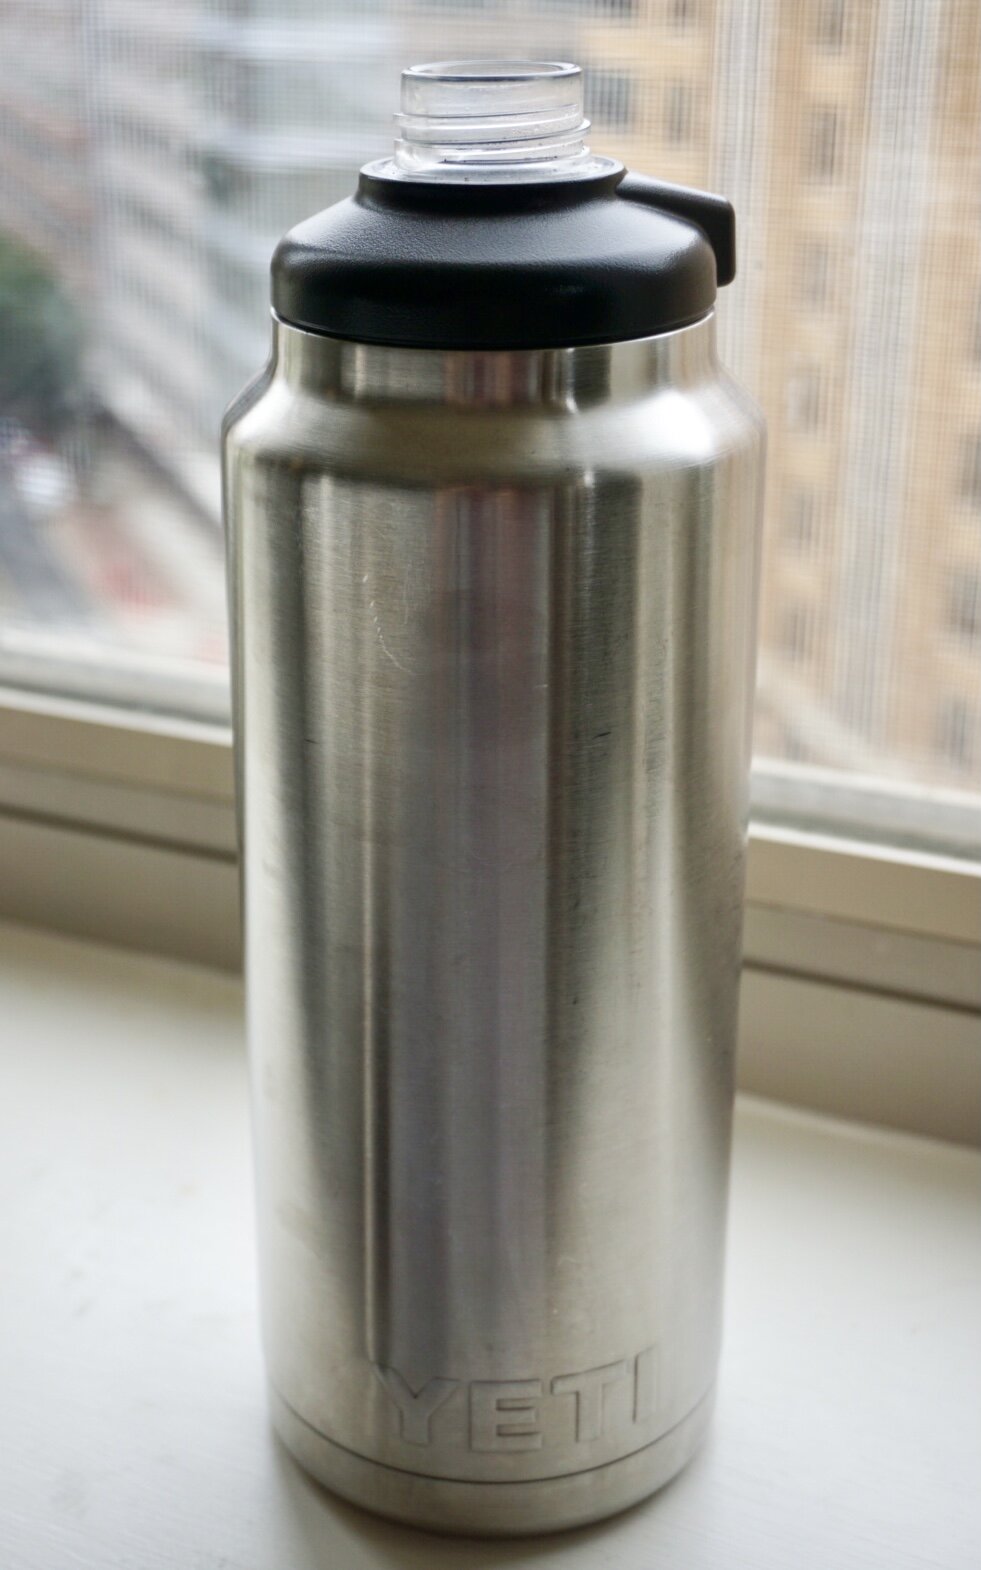 Yeti Rambler Water Bottle: Keep Your Drinks Ice Cold For Your